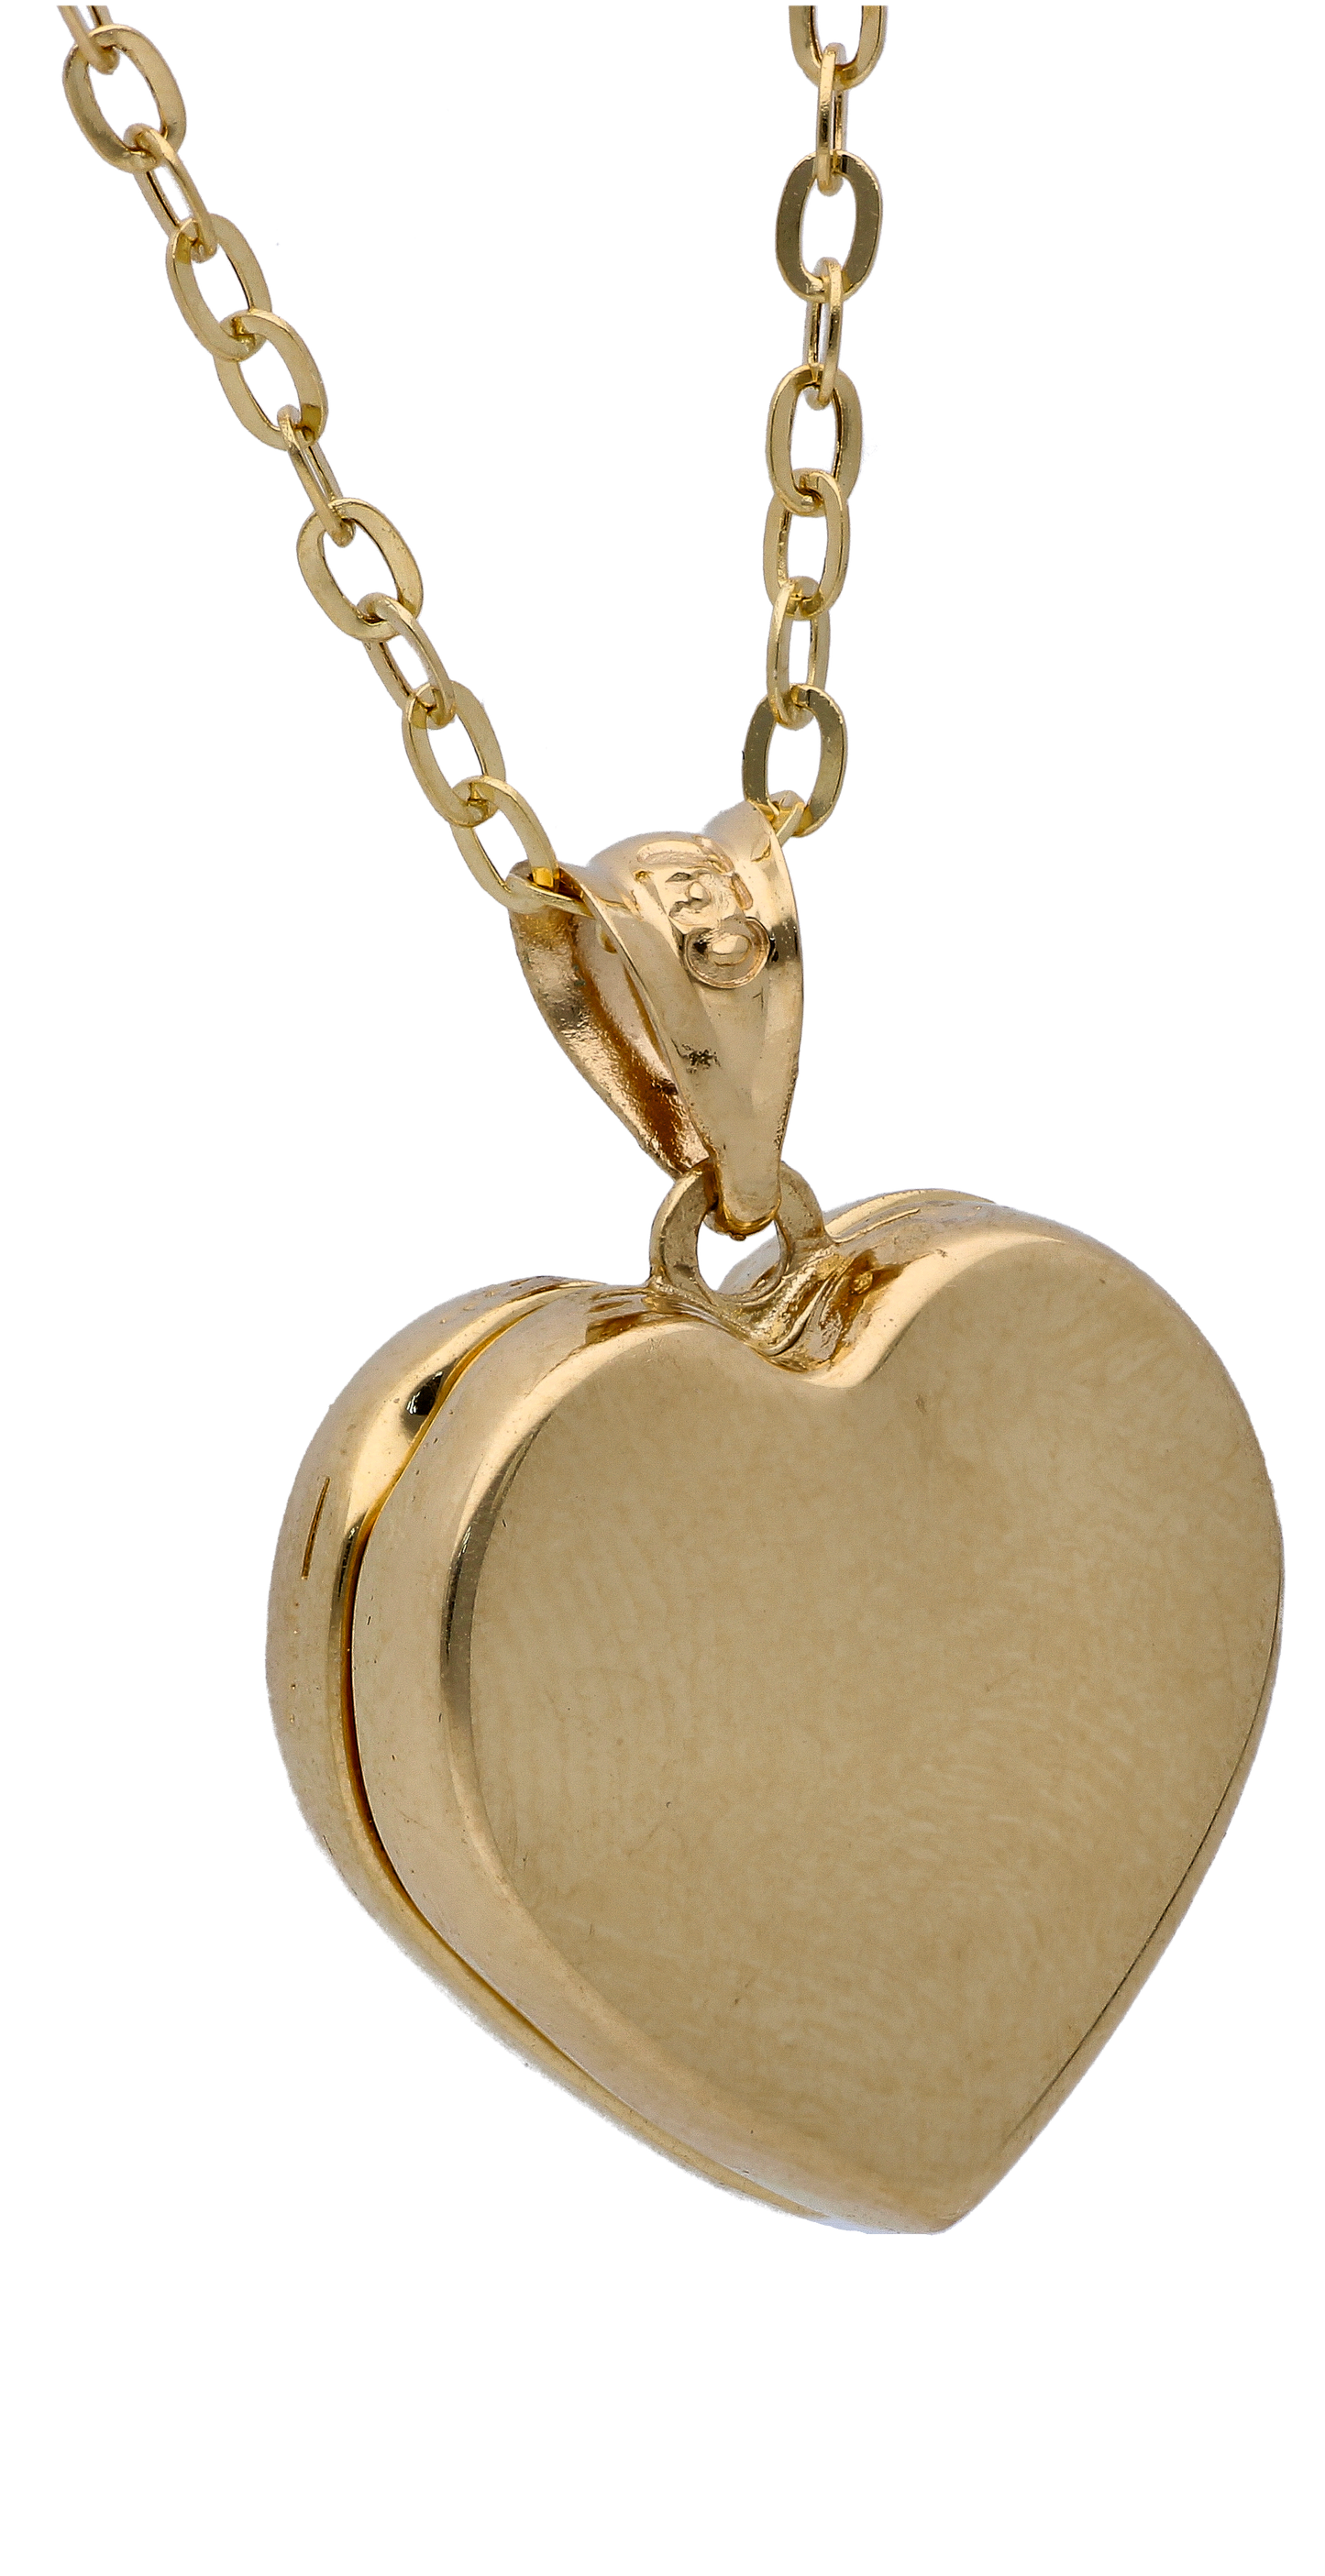 Gold Necklace (Chain with Open Heart Pendant) 18KT - FKJNKL18KU6287